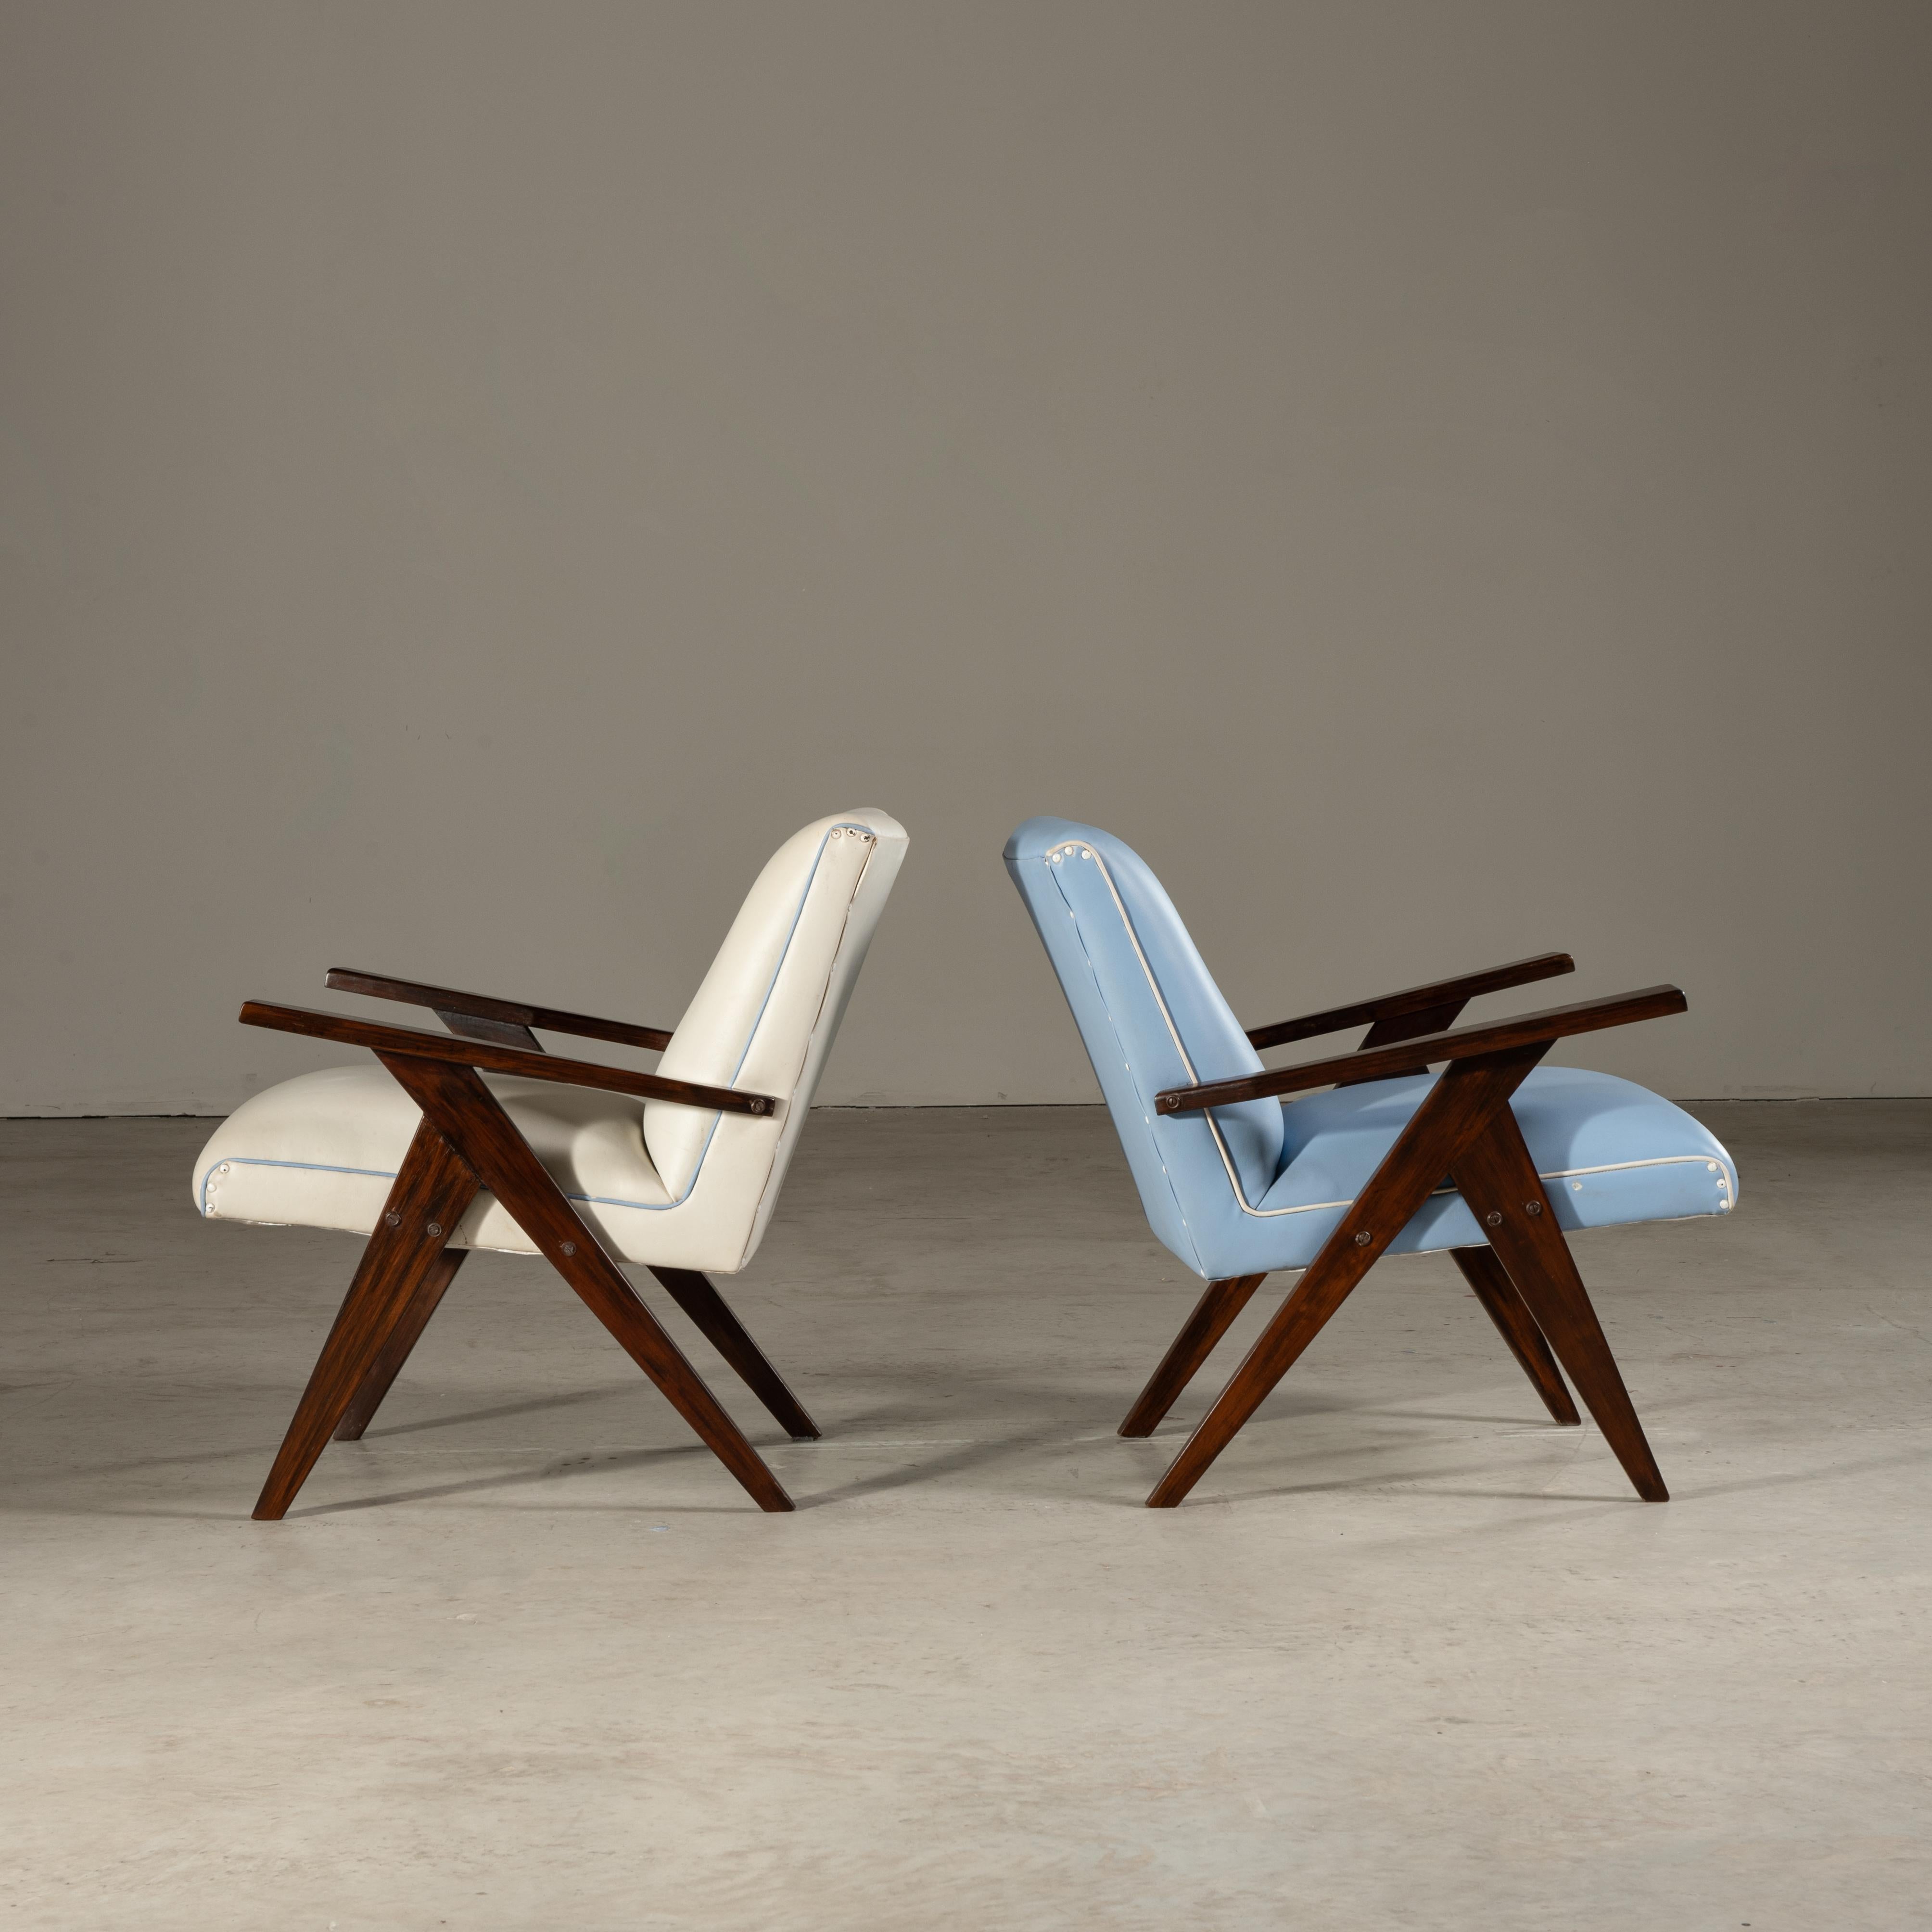 Pair of 'N' Lounge Chairs, by Zanine Caldas, Brazilian Mid-Century Modern In Good Condition For Sale In Sao Paulo, SP